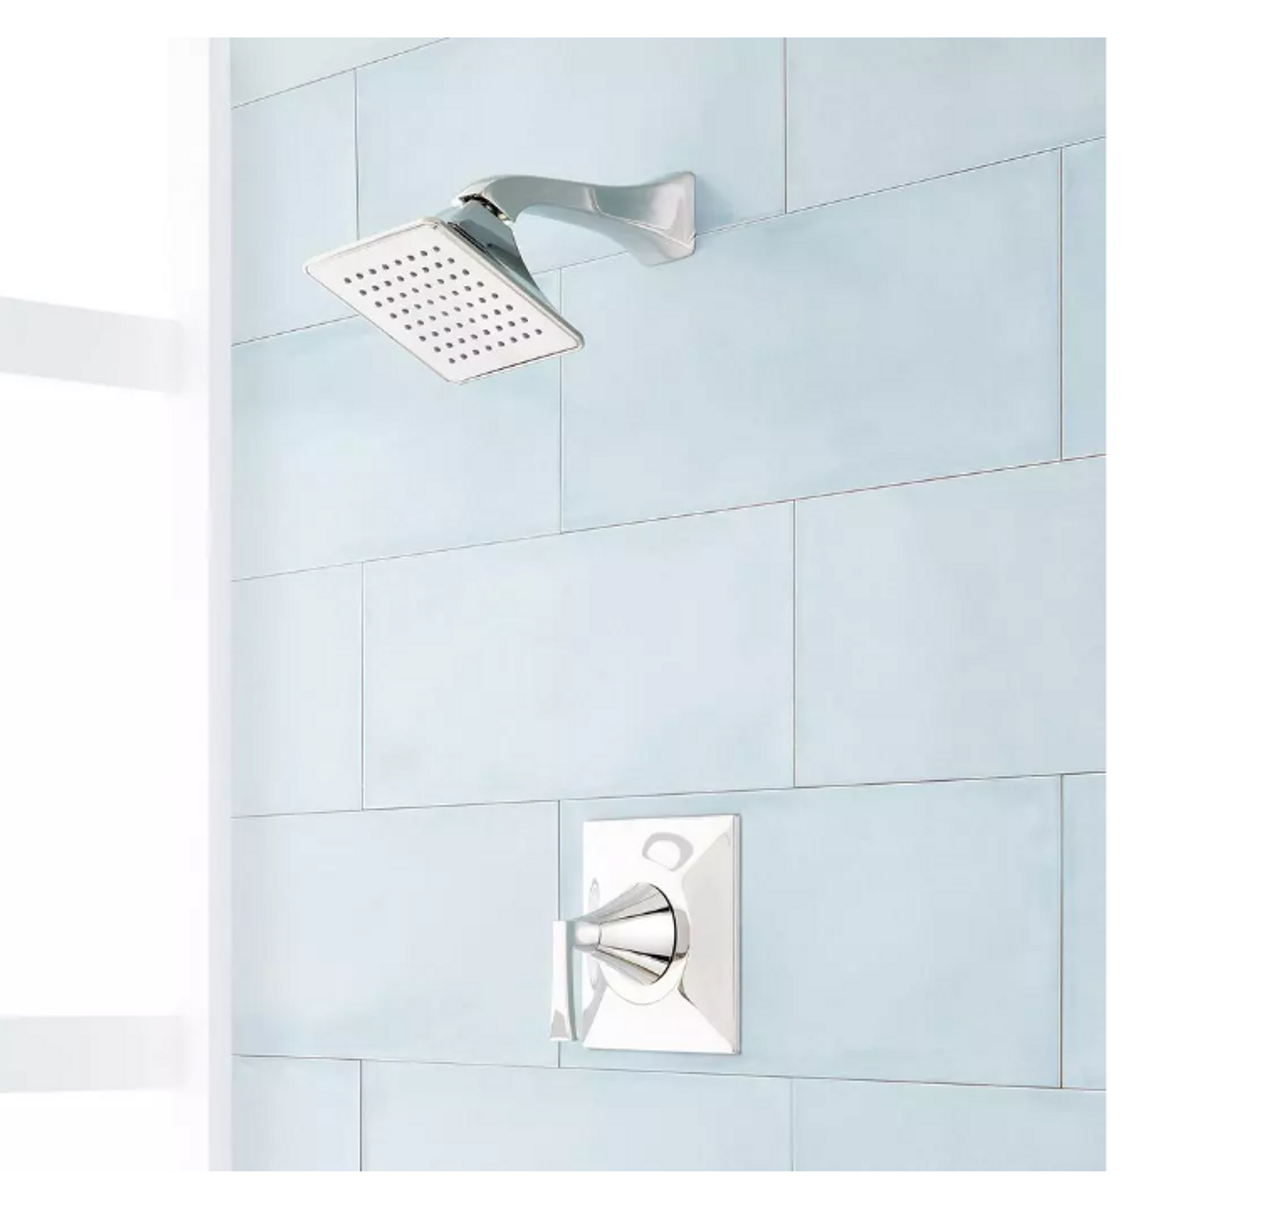 Vilamonte 1.8 gpm Shower Faucet Trim Only with Single Lever Handle in Polished Nickel